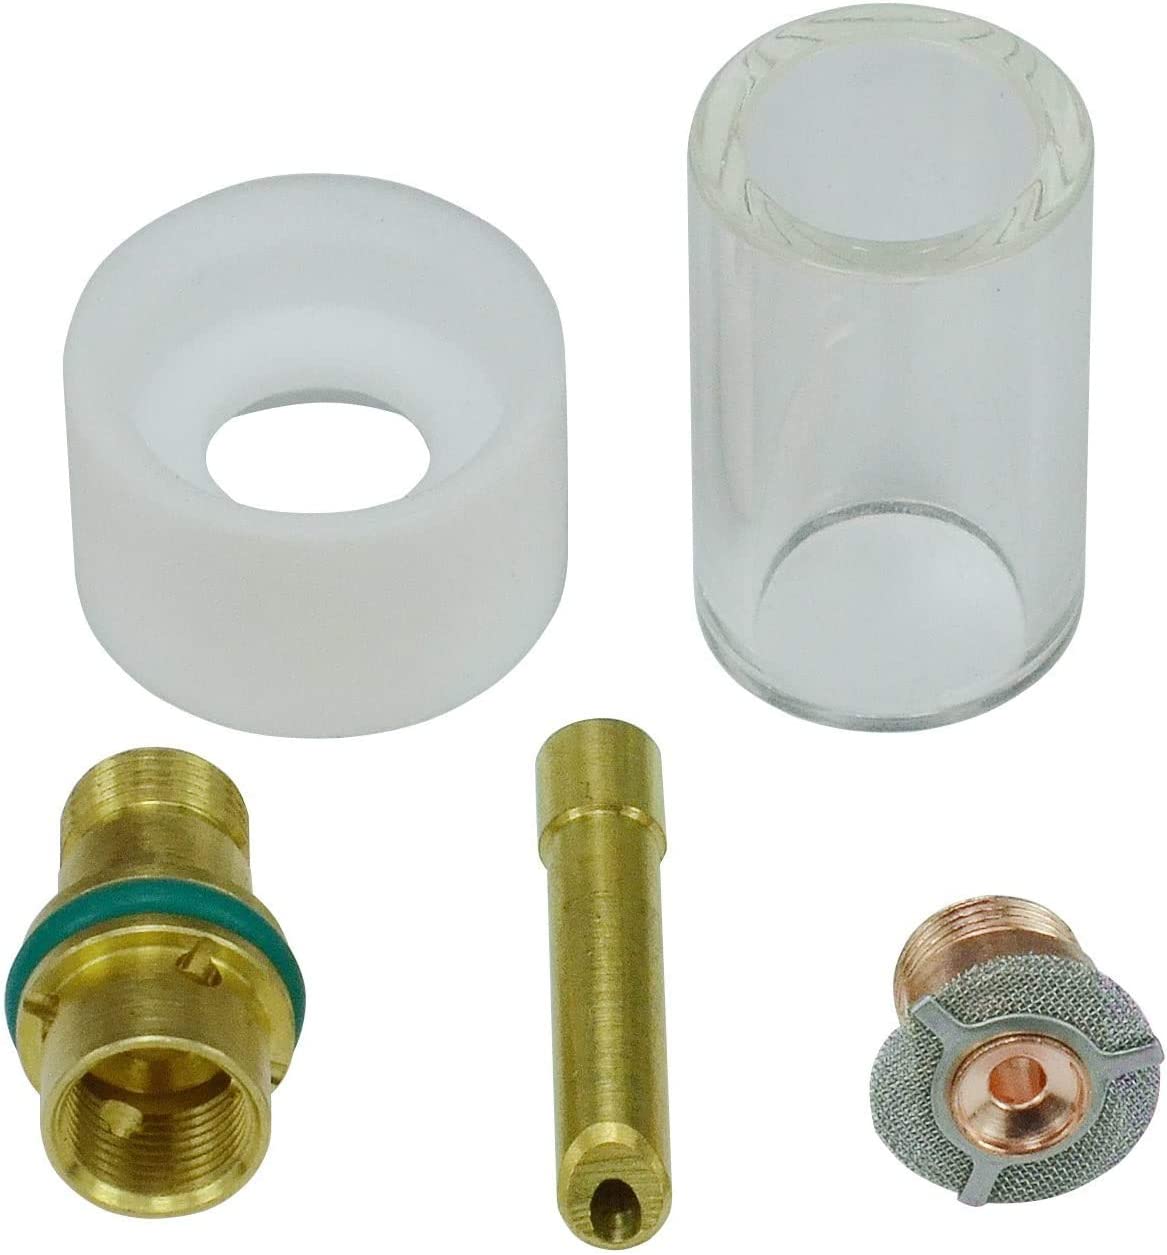 RIVERWELD WP 17 18 26 TIG Welding Torch Wedge Collet Tungsten Apdapter Gas Saver Glass Cup (9/16" x 1-5/16") Kit (3/24" kit 5pcs) Visit the RIVERWELD Store